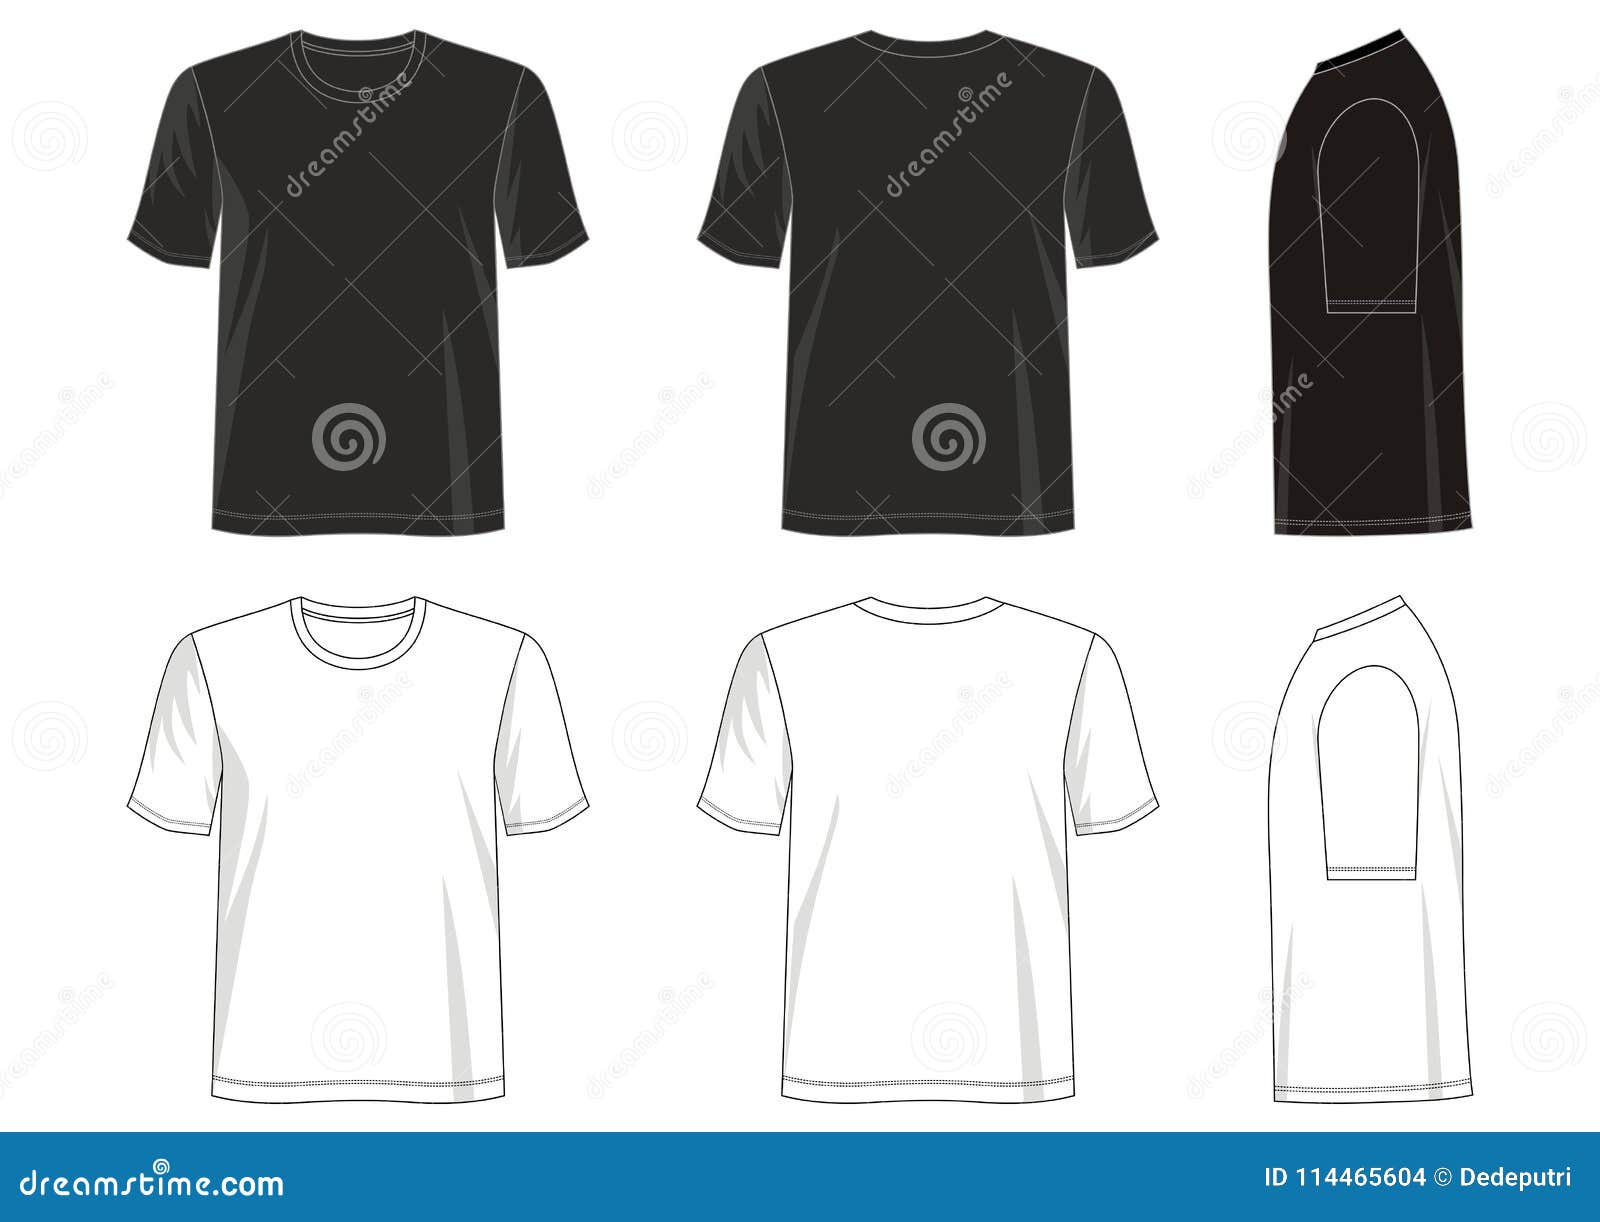 Download Design Vector T Shirt Template Collection For Men 029 Stock Vector Illustration Of Graphic Object 114465604